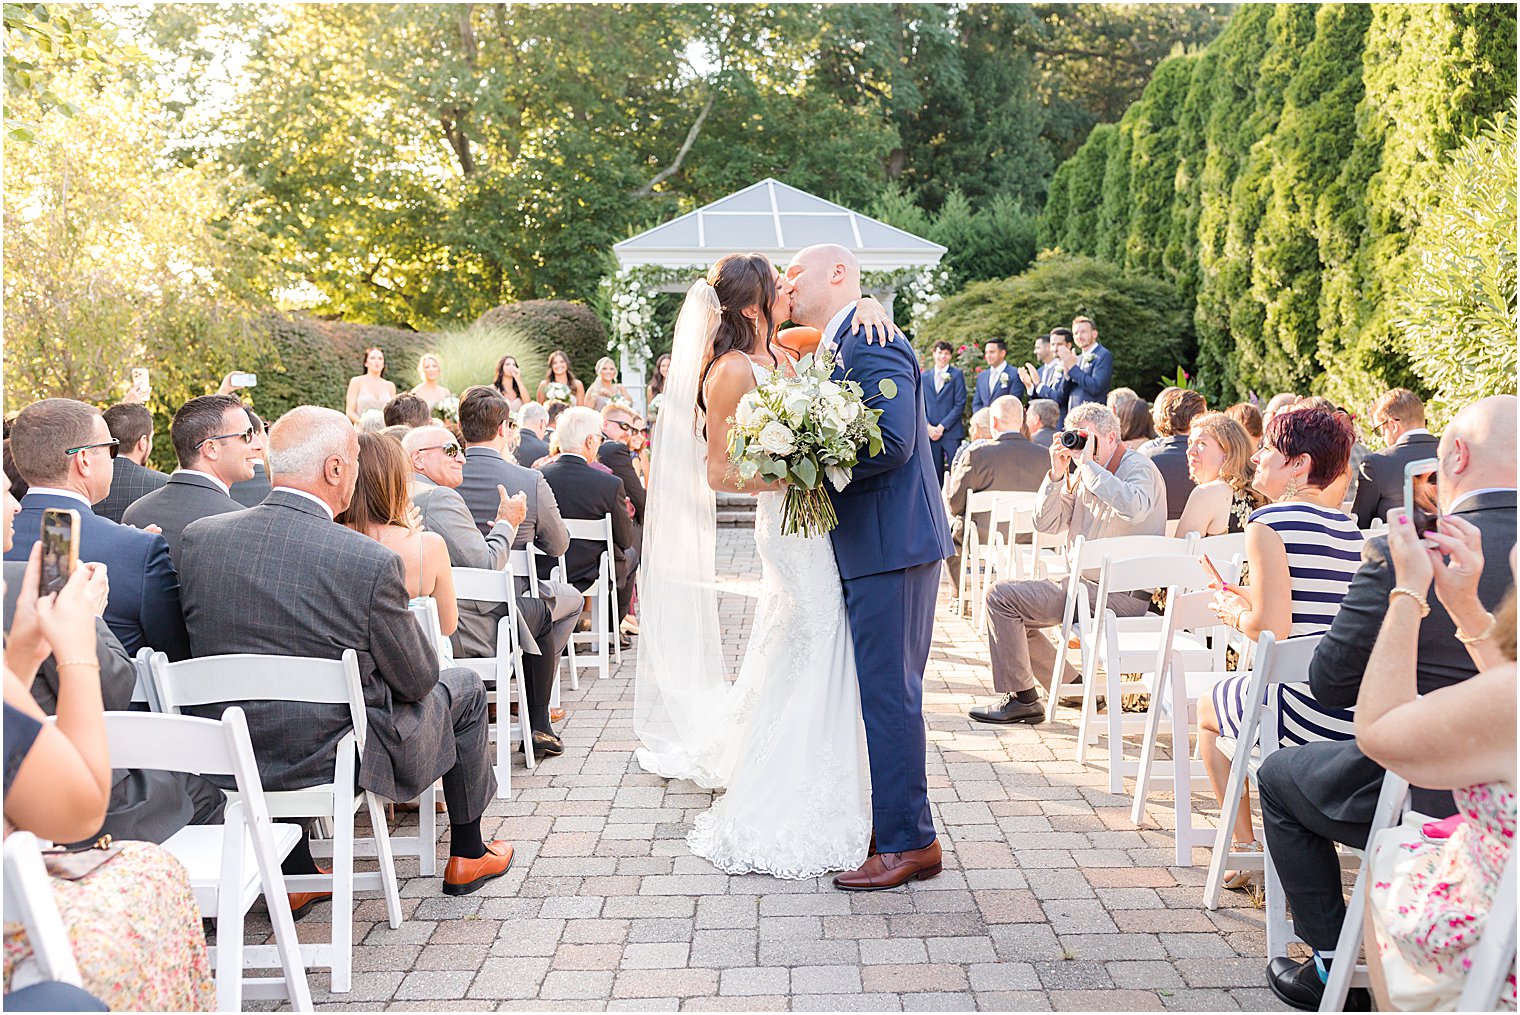 newlyweds kiss in aisle during garden wedding ceremony in New Jersey